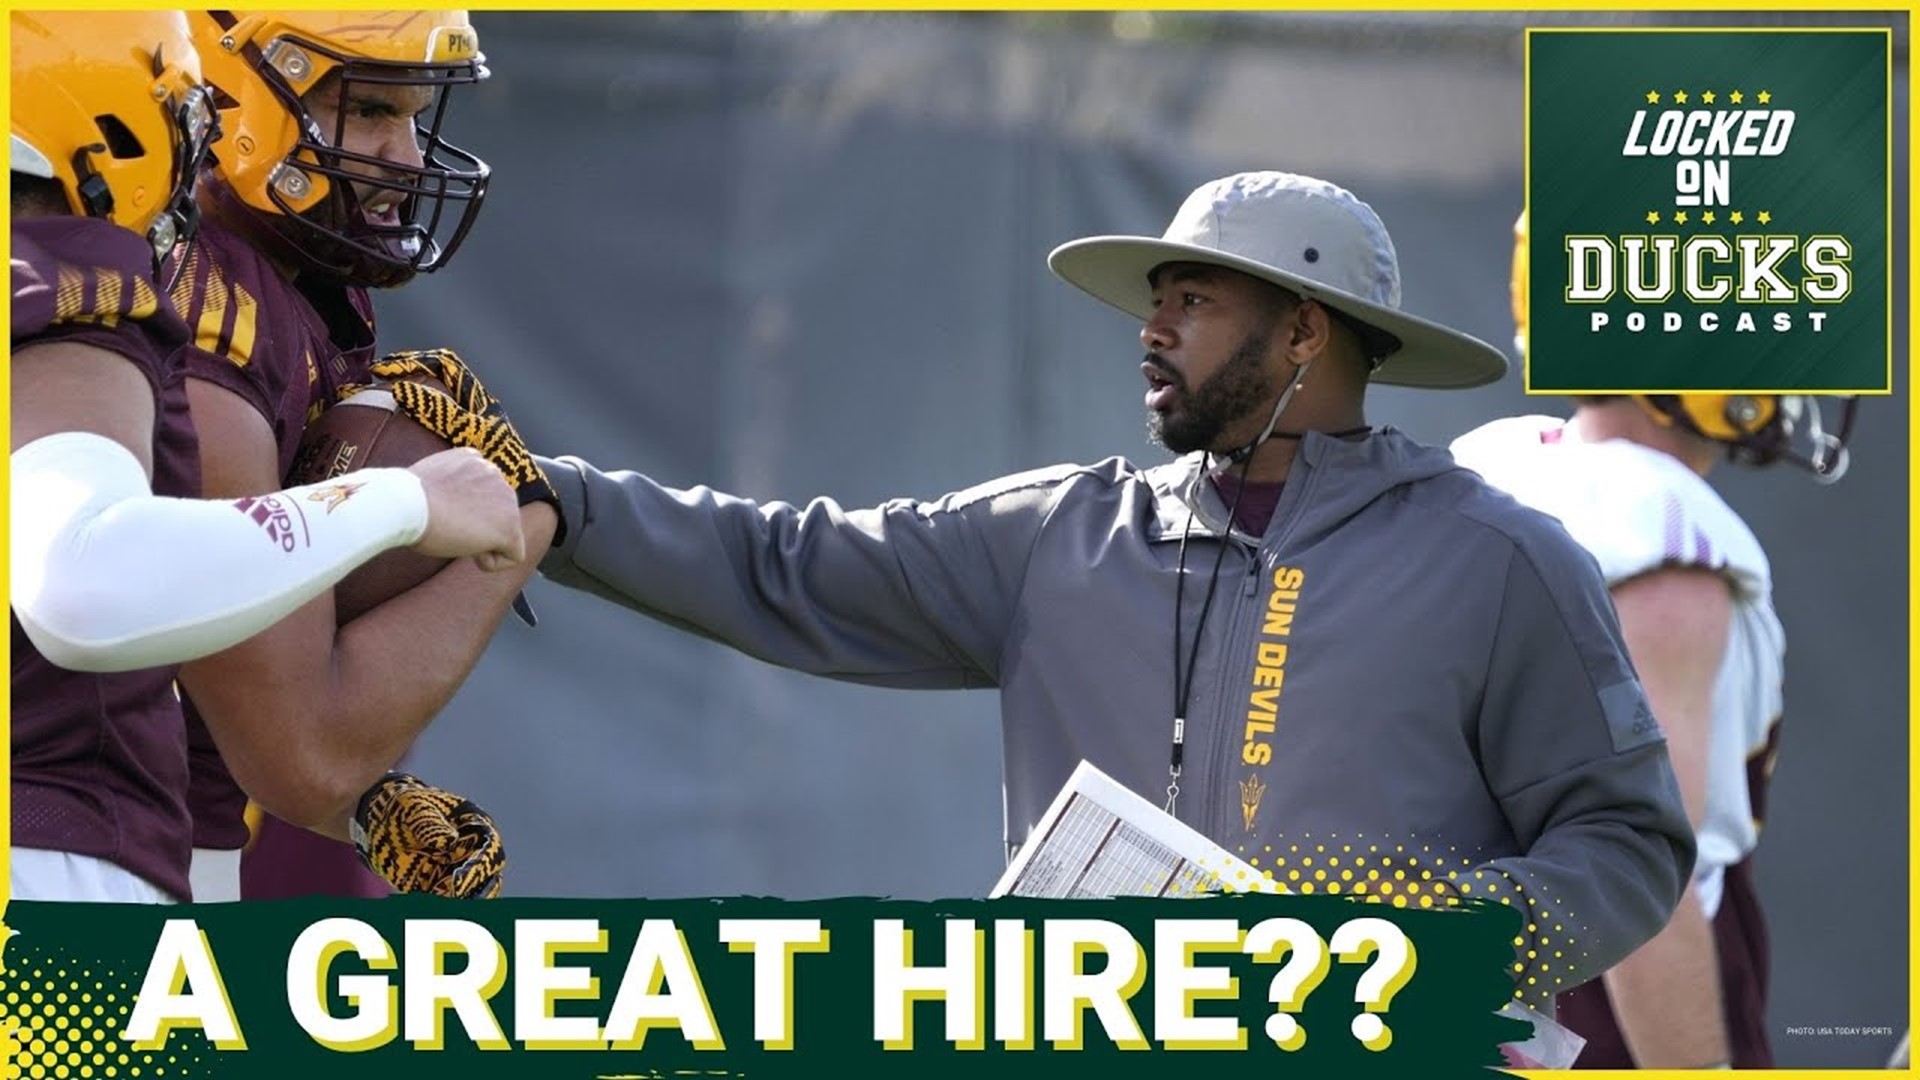 Carlos Locklyn left Oregon's staff for Ohio State last week, and the Ducks have made their move in hiring Ra'Shaad Samples from Arizona State